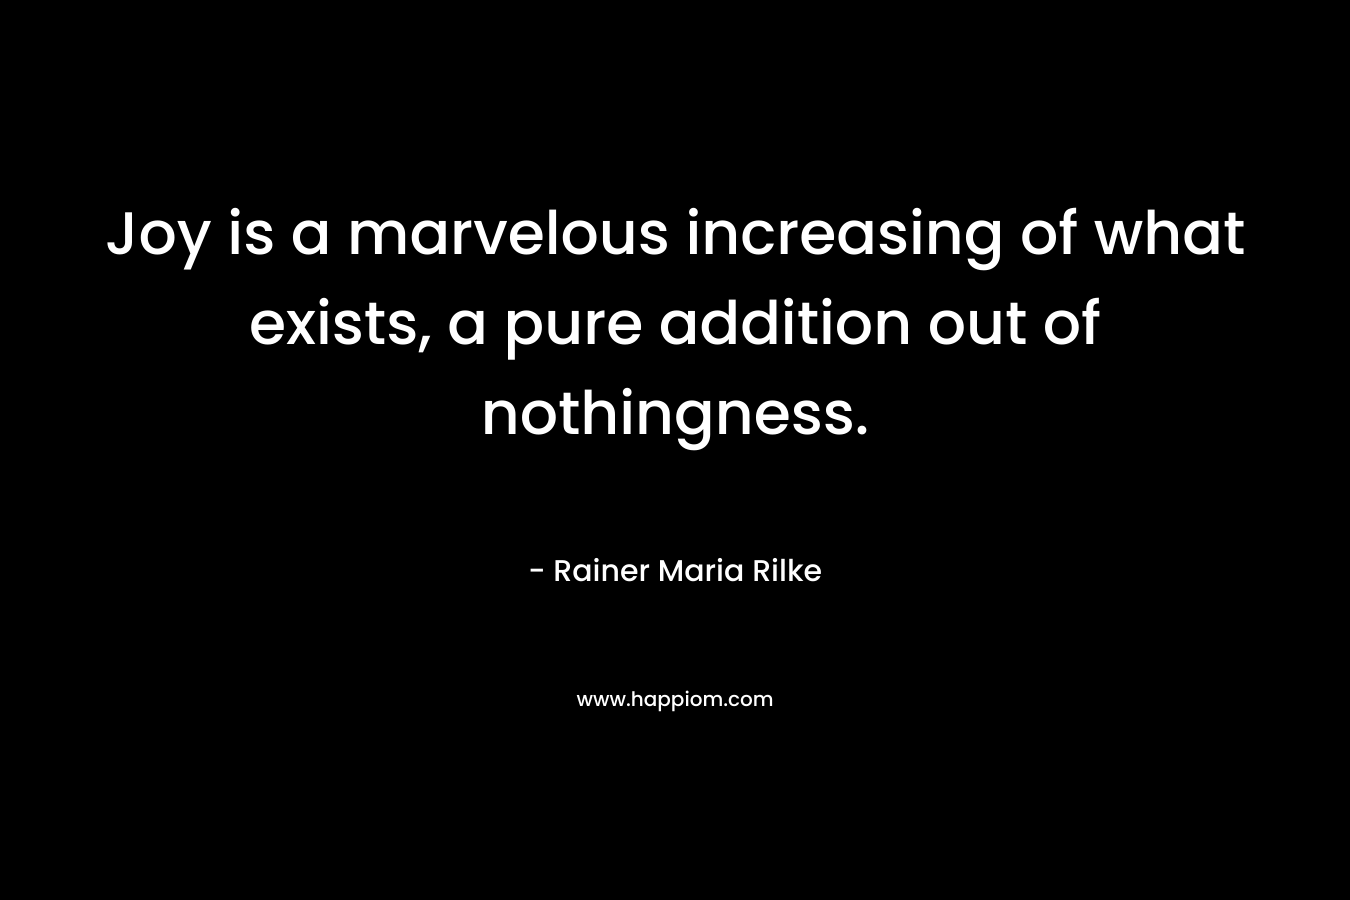 Joy is a marvelous increasing of what exists, a pure addition out of nothingness.